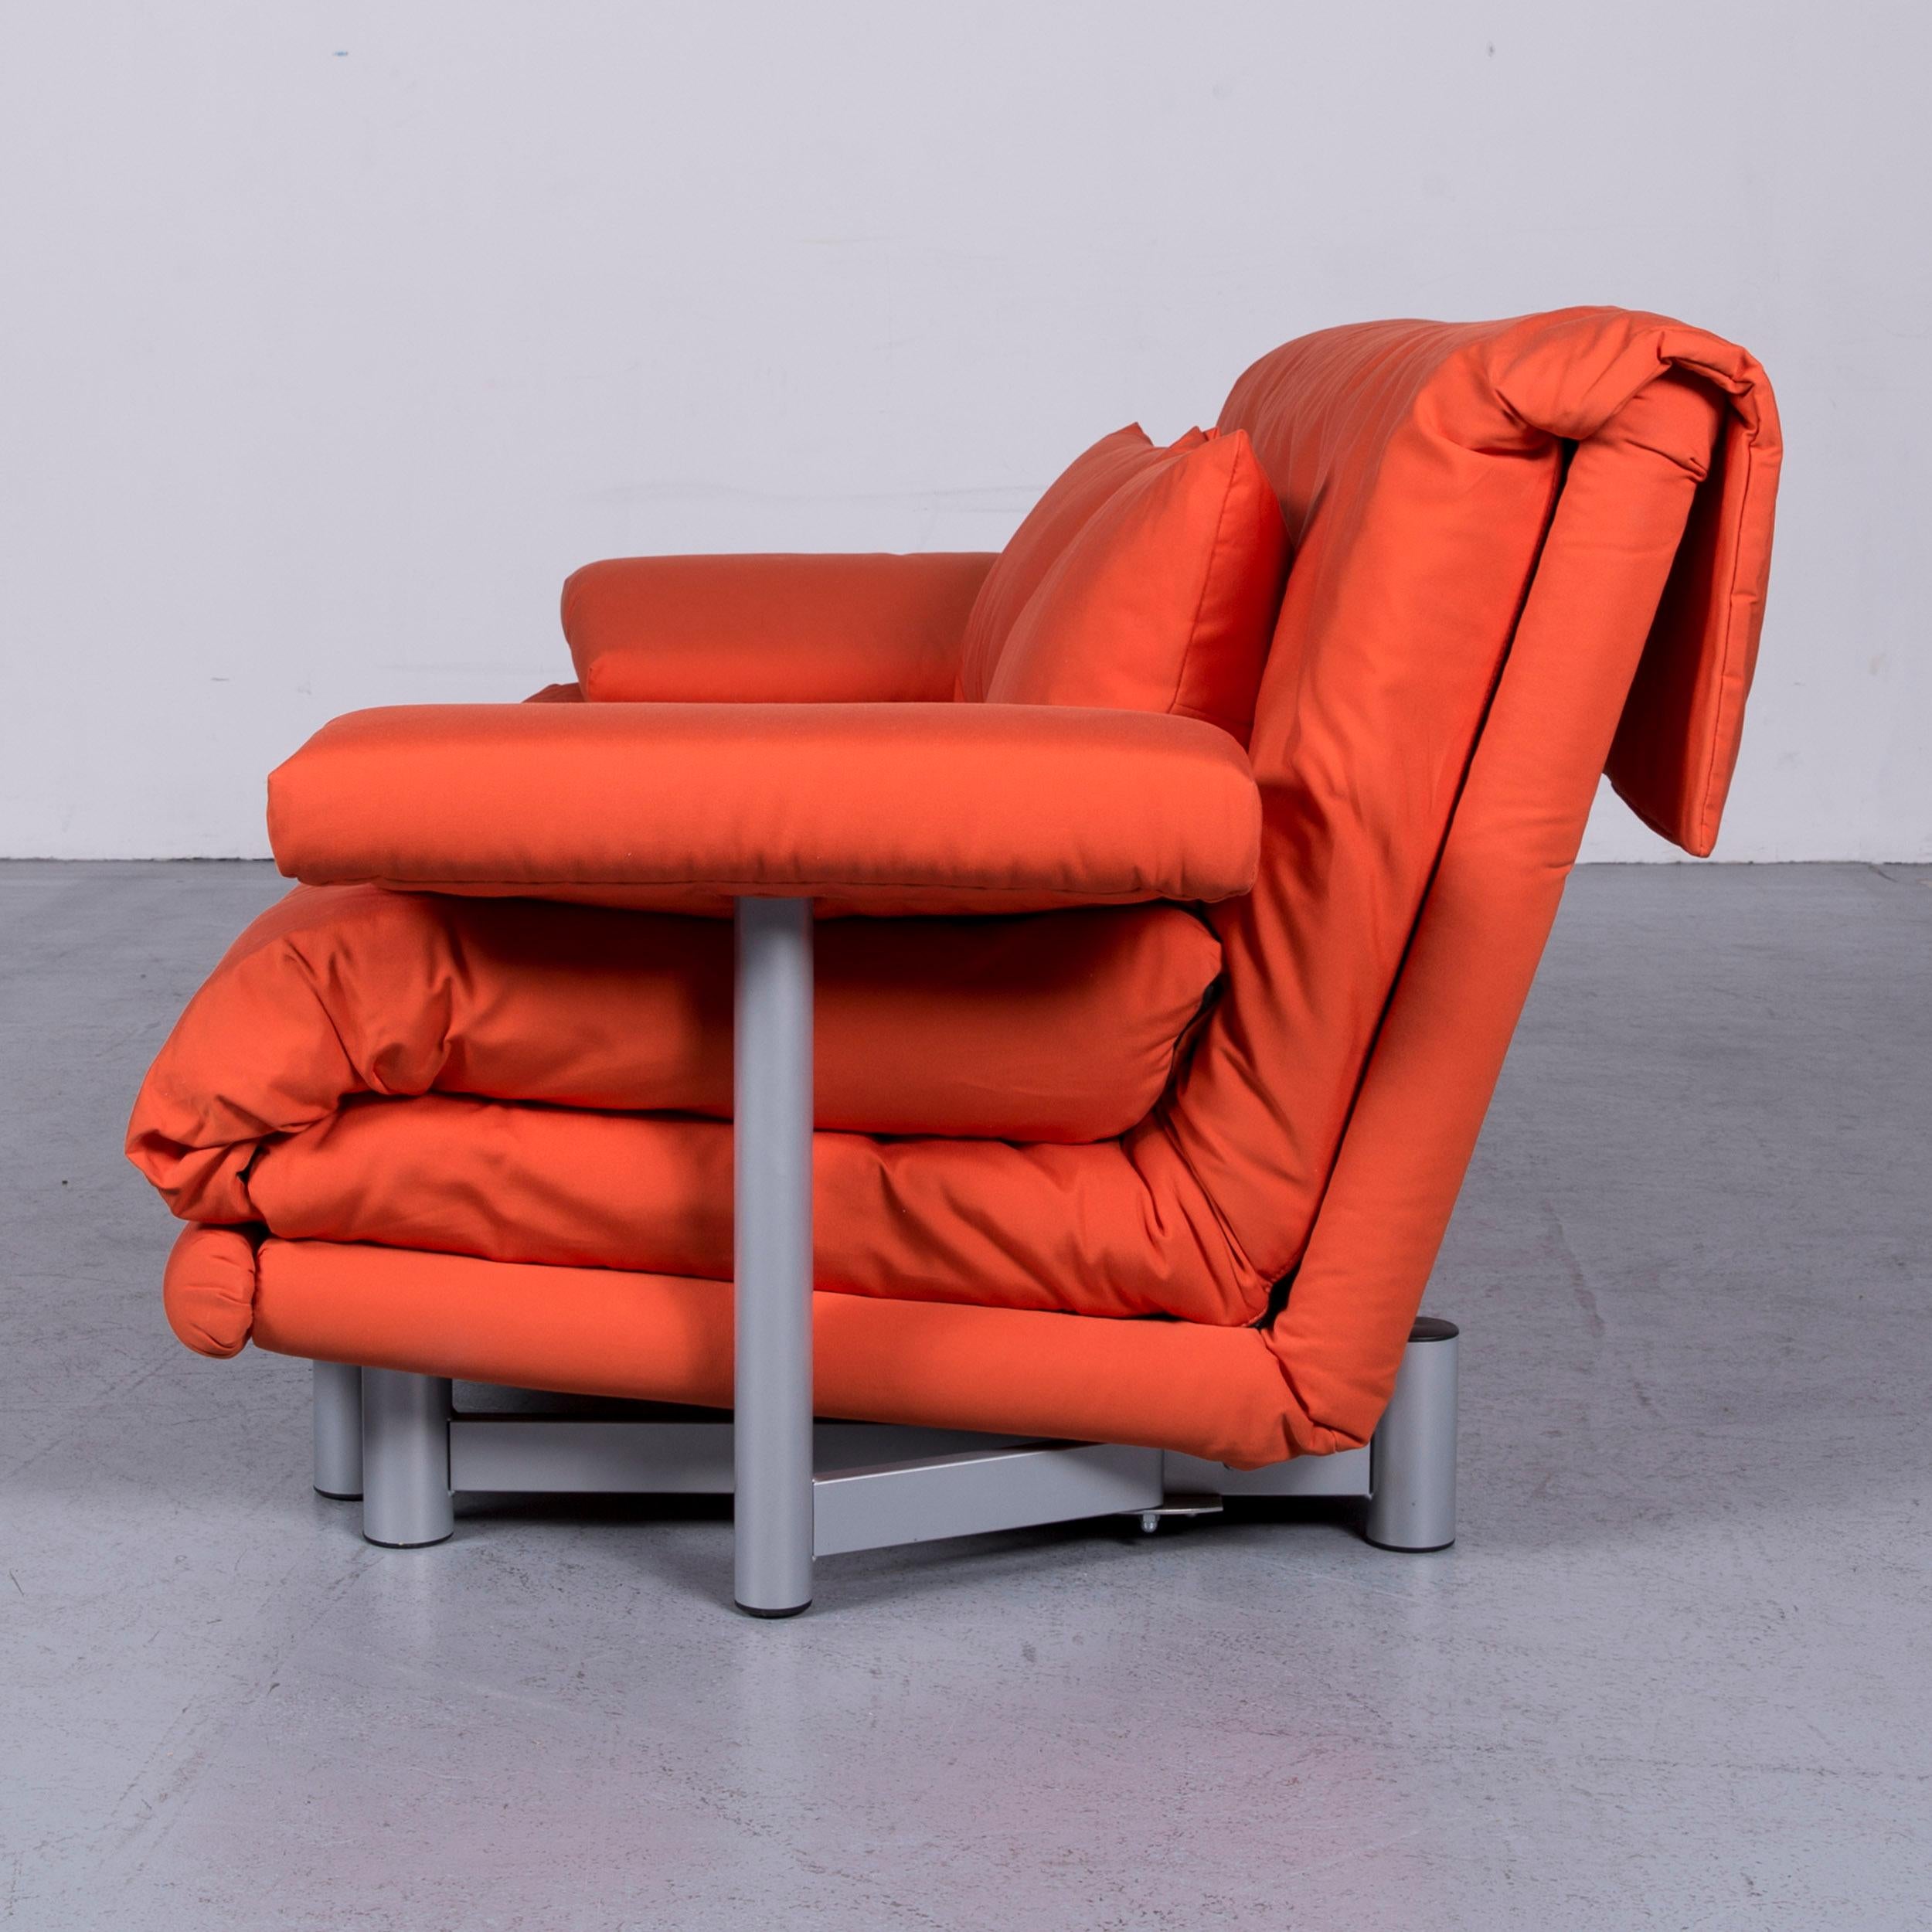 Ligne Roset Multy Fabric Sofa-Bed Orange Two-Seat Couch Sleep Function 7